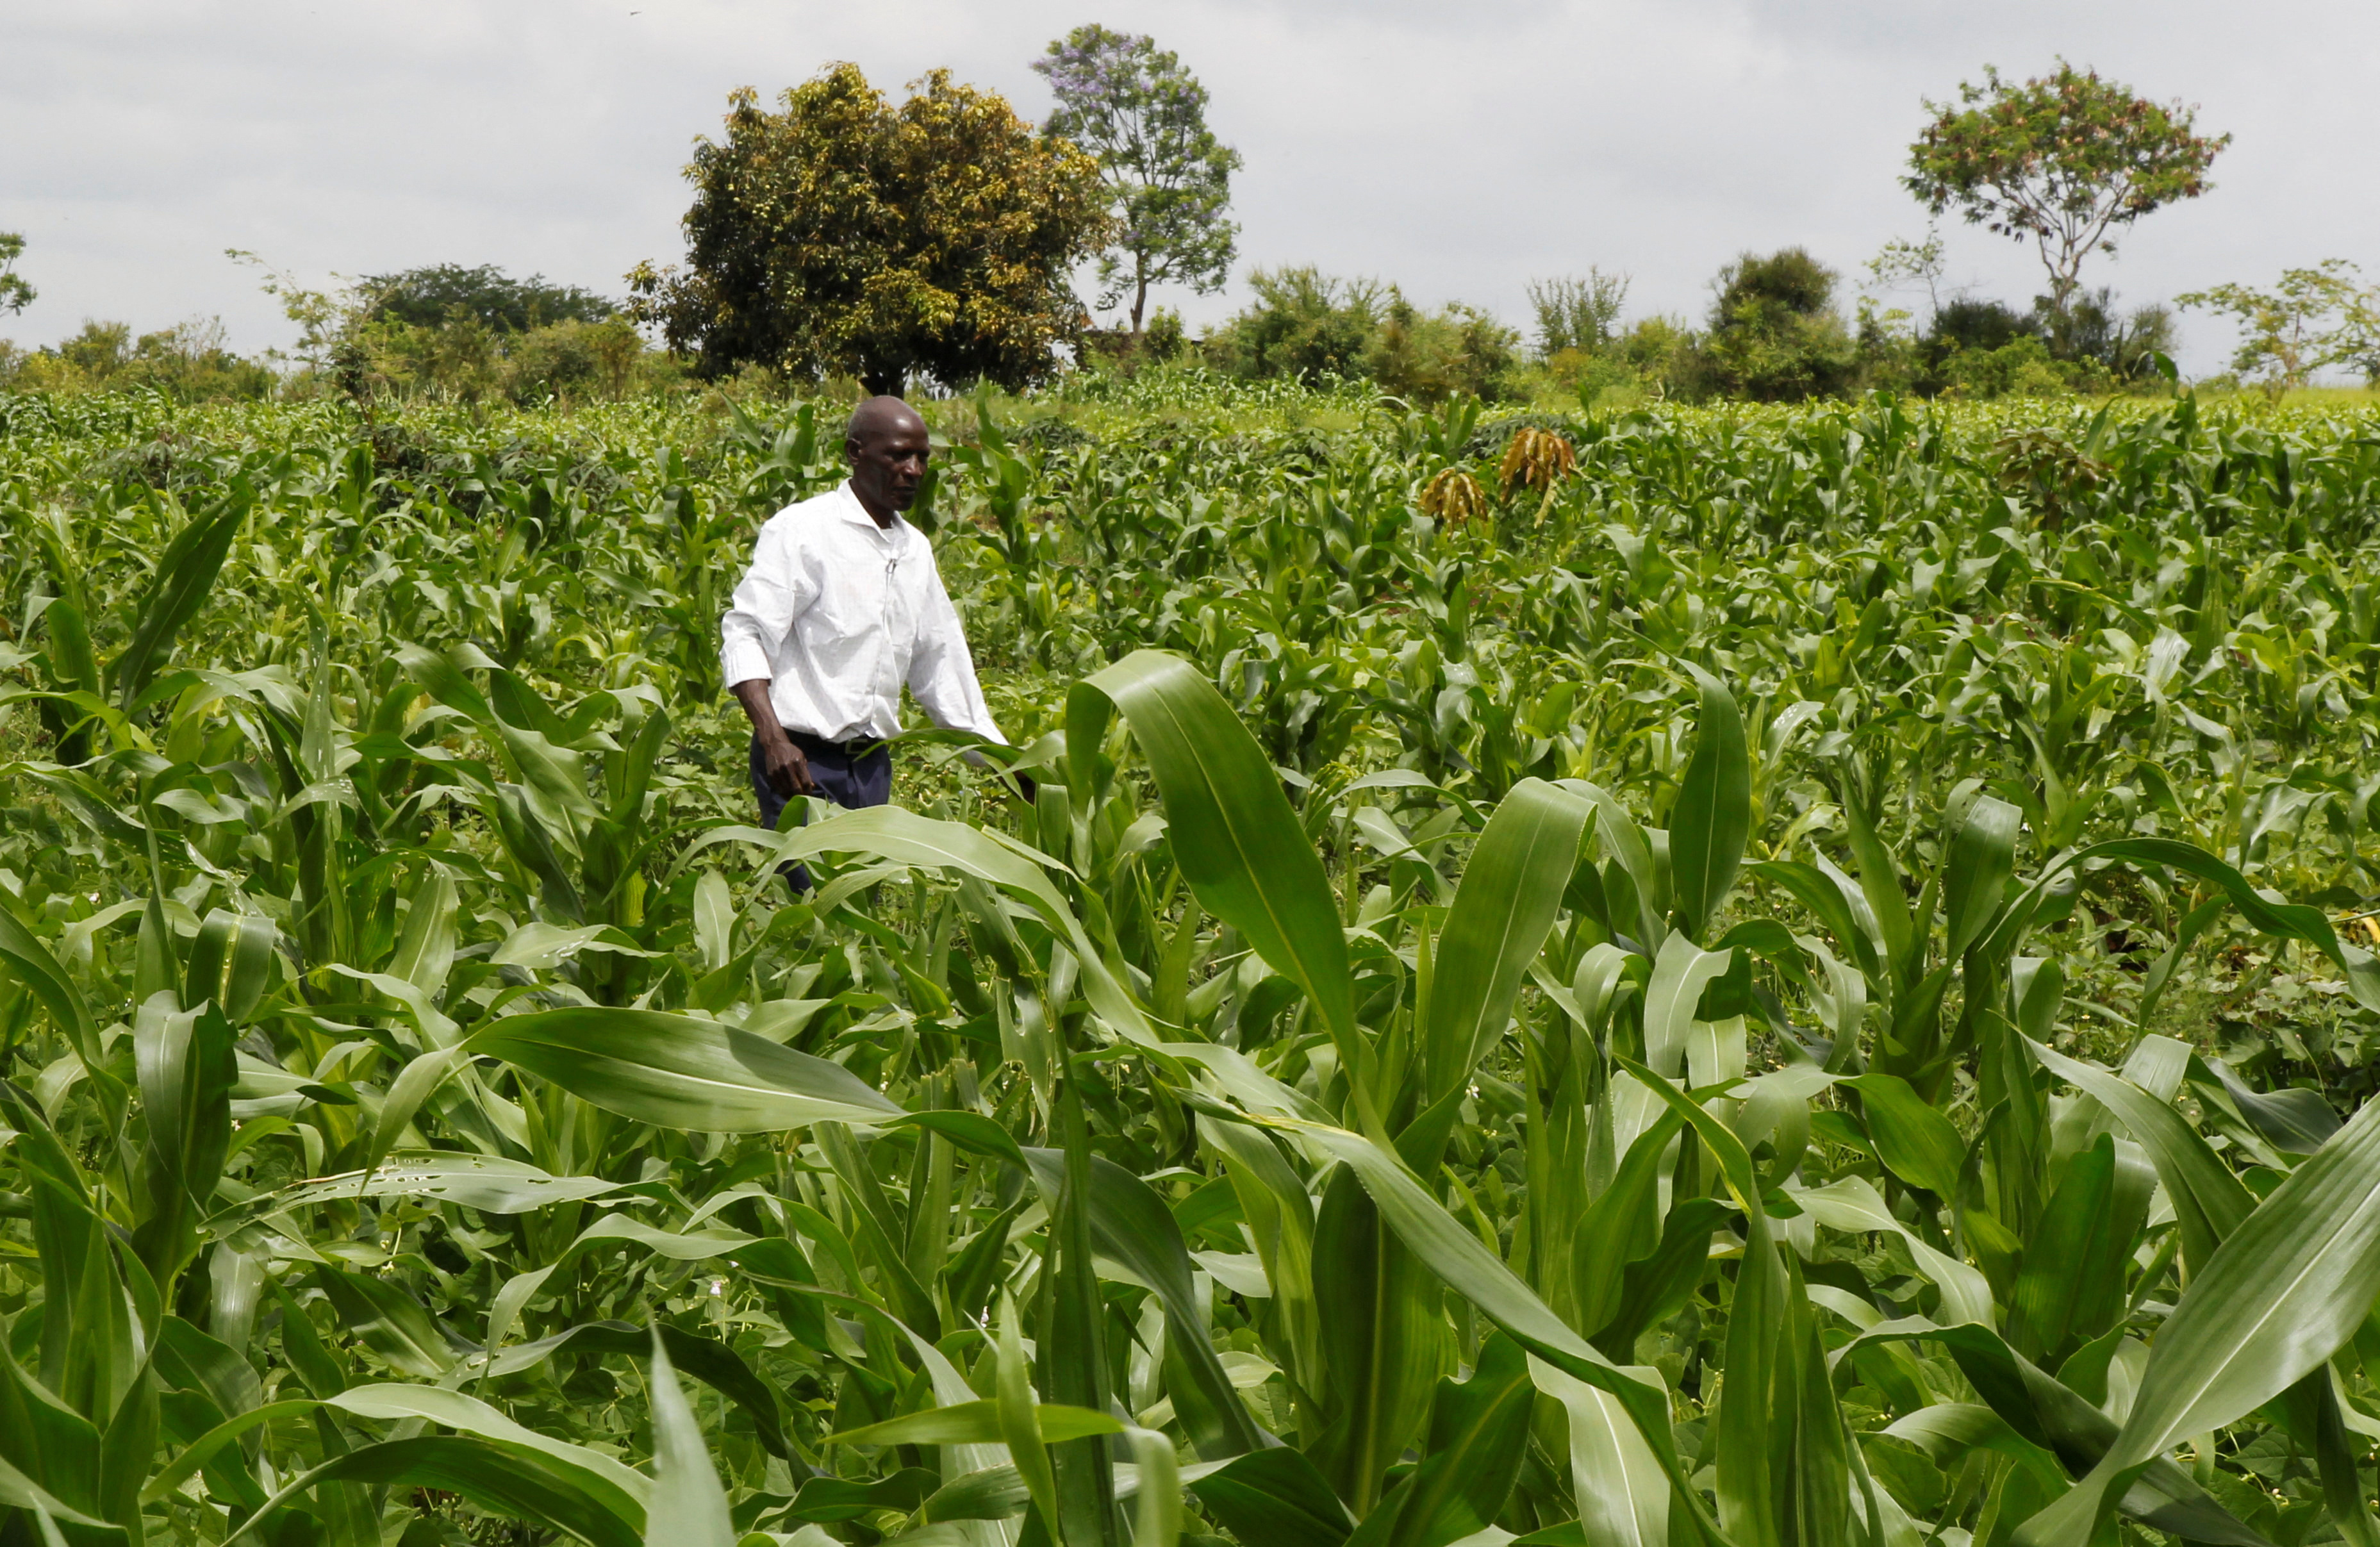 Samuel Wathome 65, a small-scale farmer inspects his crop at his maize farm where he plants indigenous seeds at Kyeleni village of Machakos